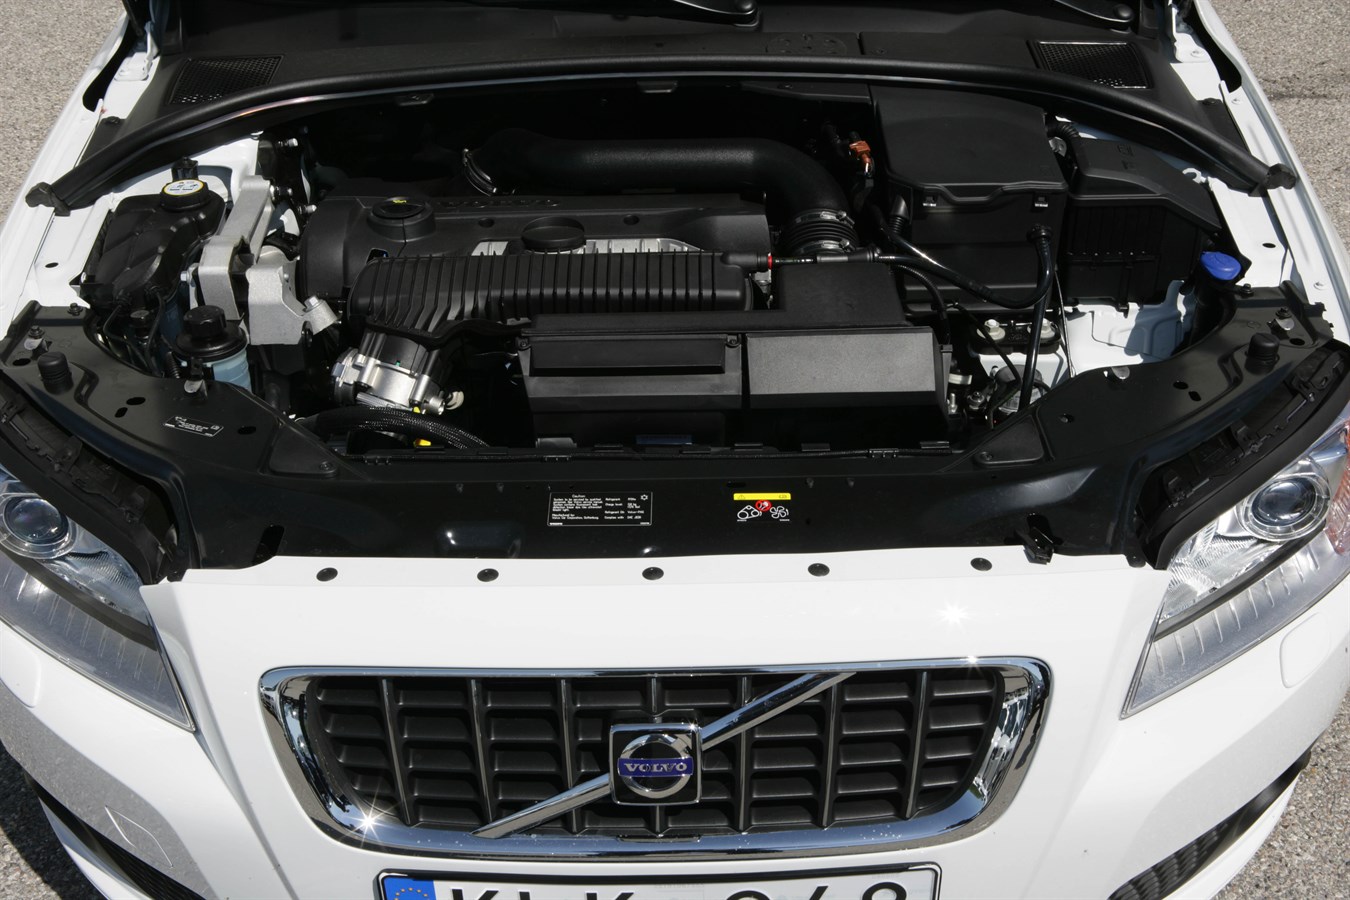 A Flexifuel engine with 200 hp (147kw), 2.5 litre turbo is available in Volvo V70 and S80 - responsibility for the environment with extra power.